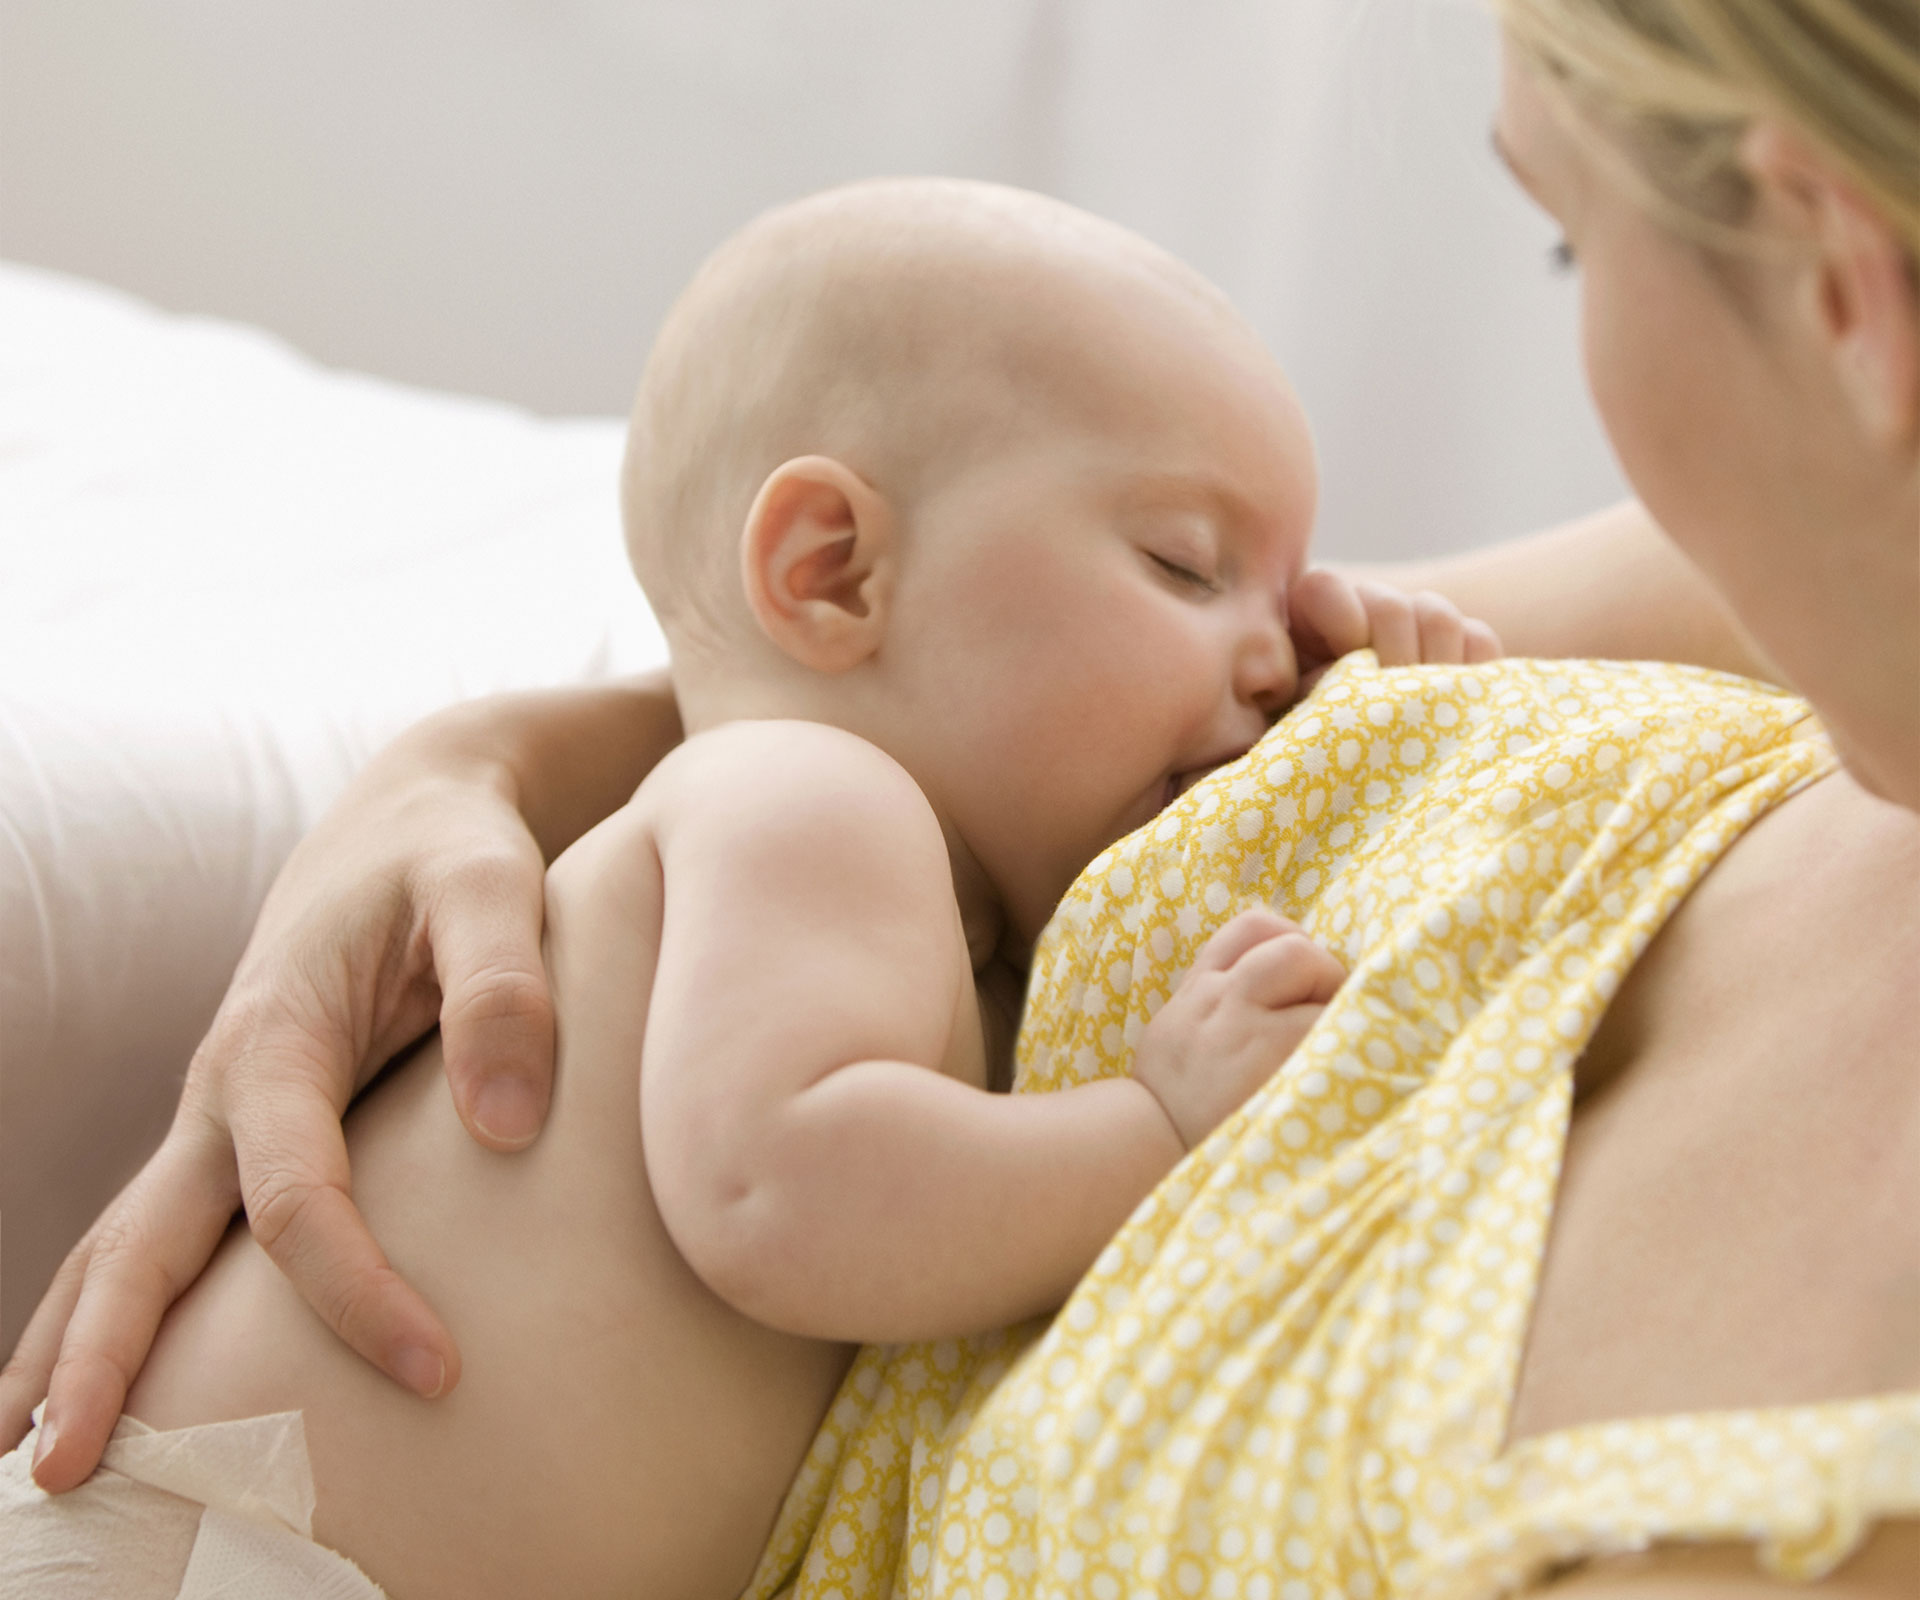 Breastfeeding is “overrated”, new book claims